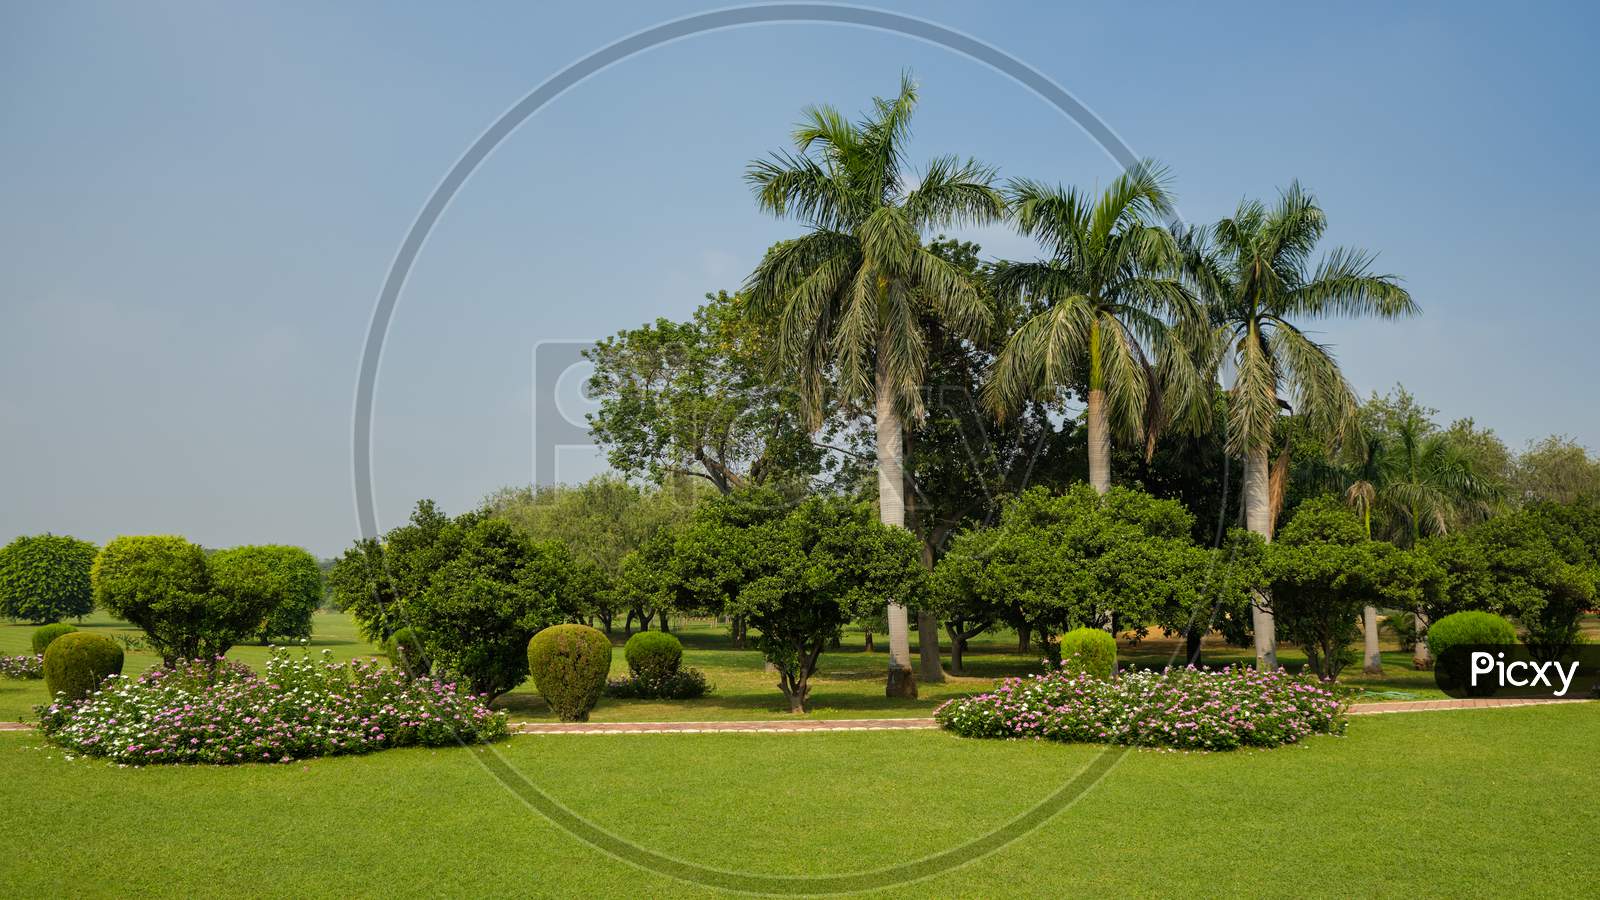 Green Garden Of The Lotus Temple, A Bahai House Of Worship In New Delhi, India